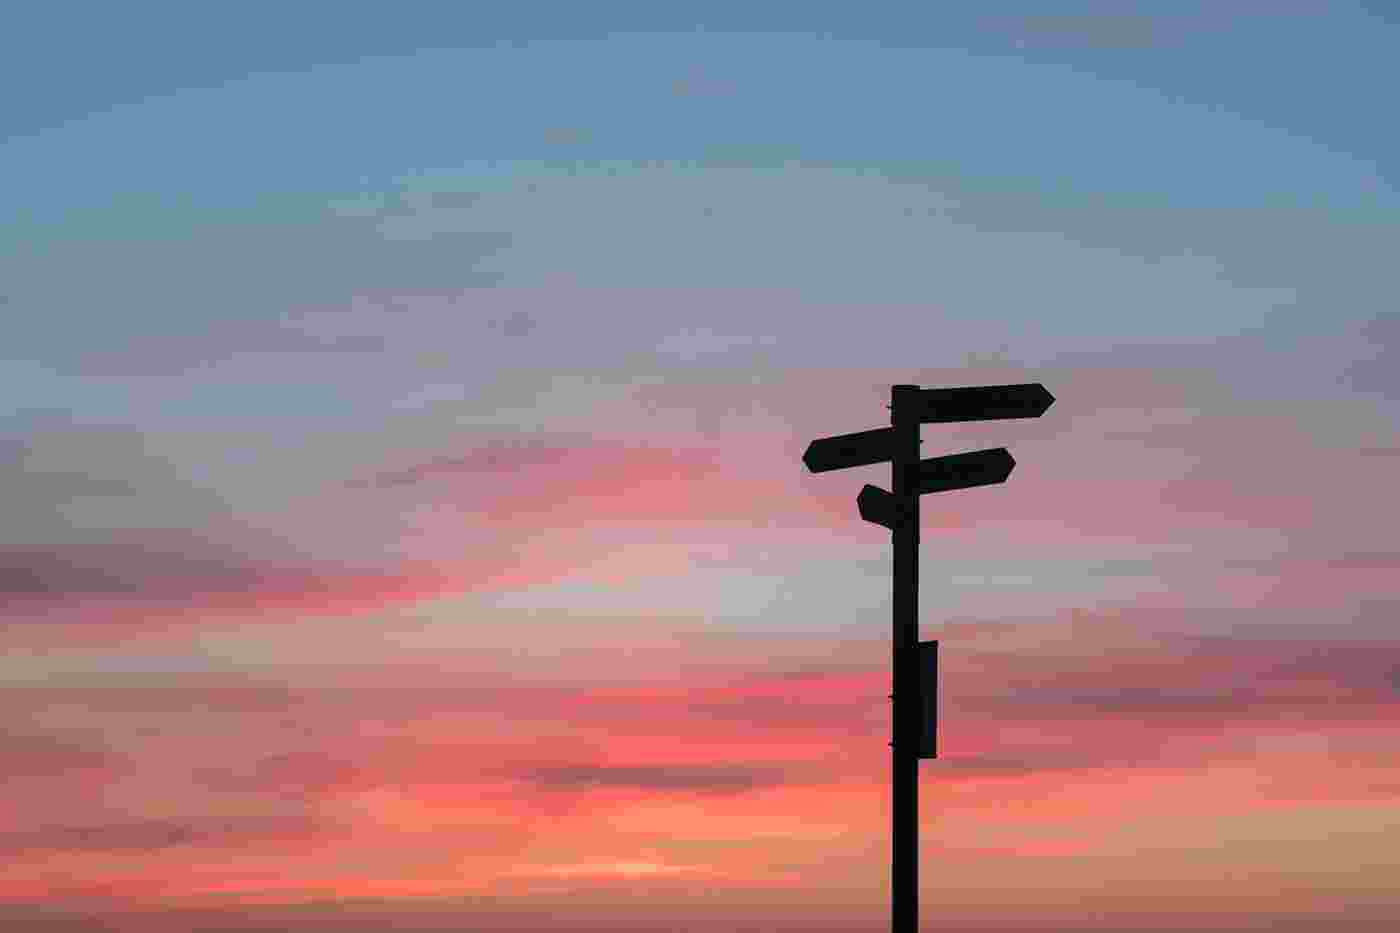 Silhouette of a sign post